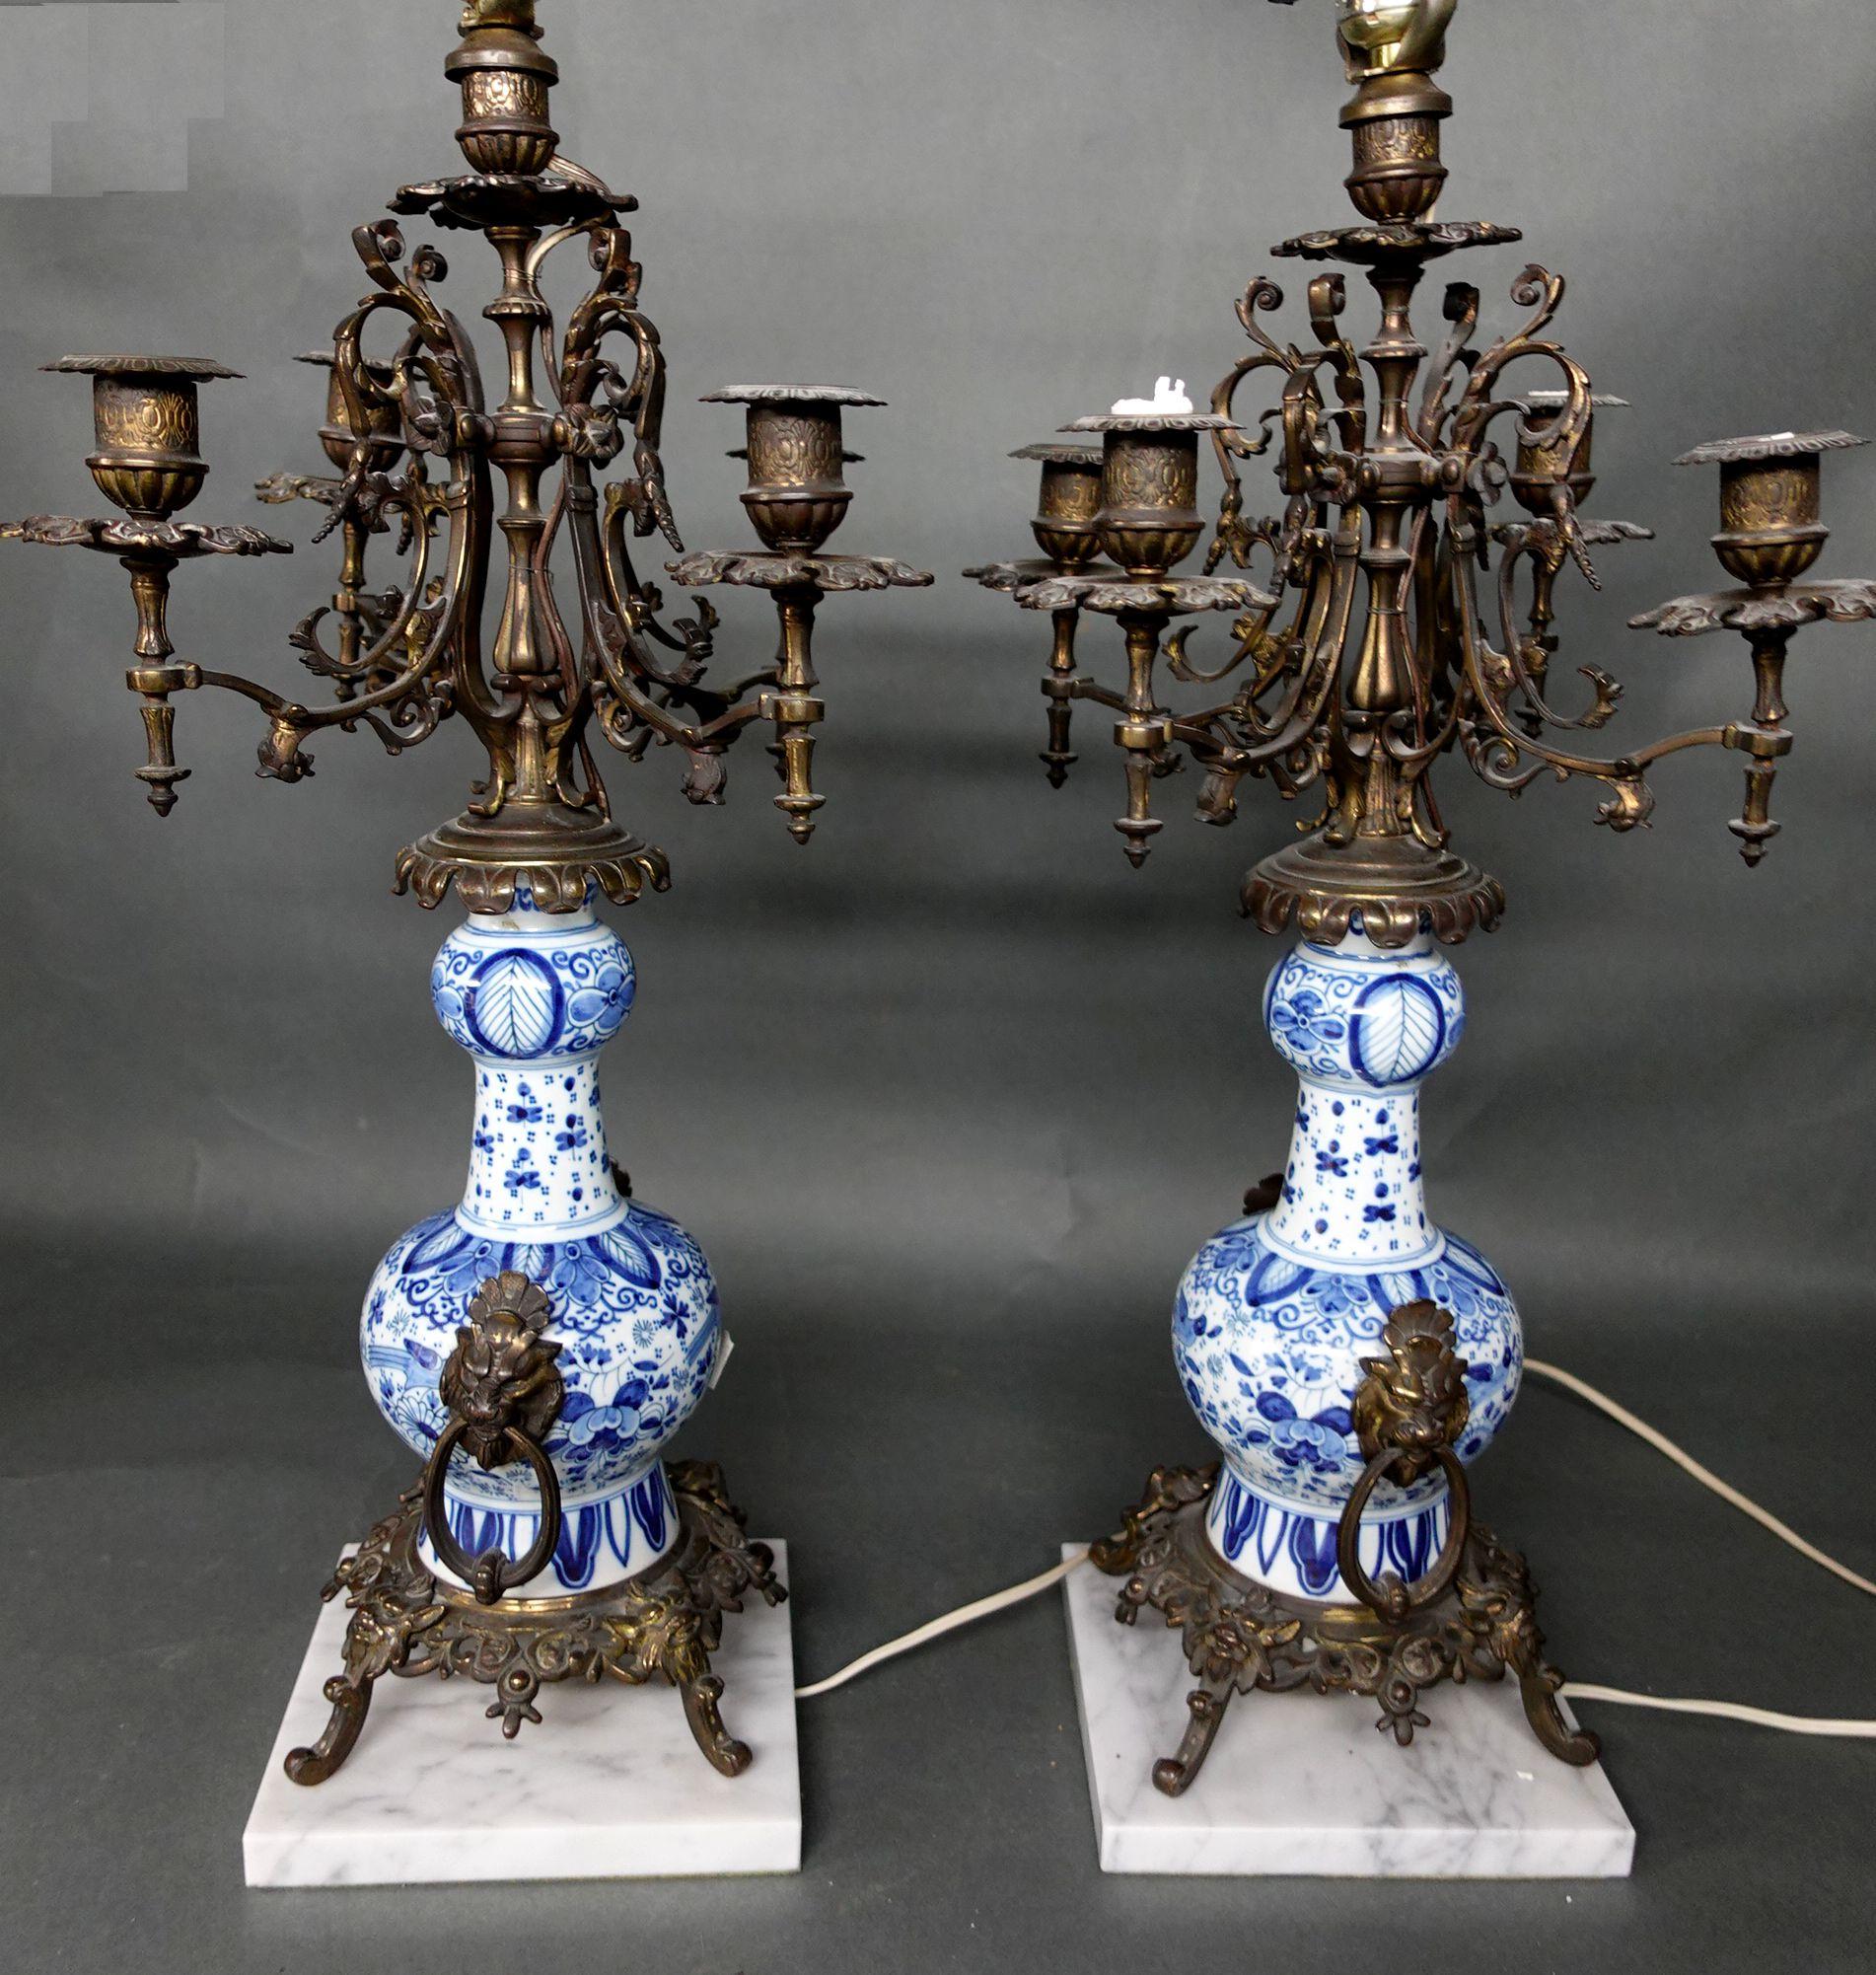 Pair of Blue and White Gilt-Bronze Candelabras and Lamps on Marble Bases For Sale 4